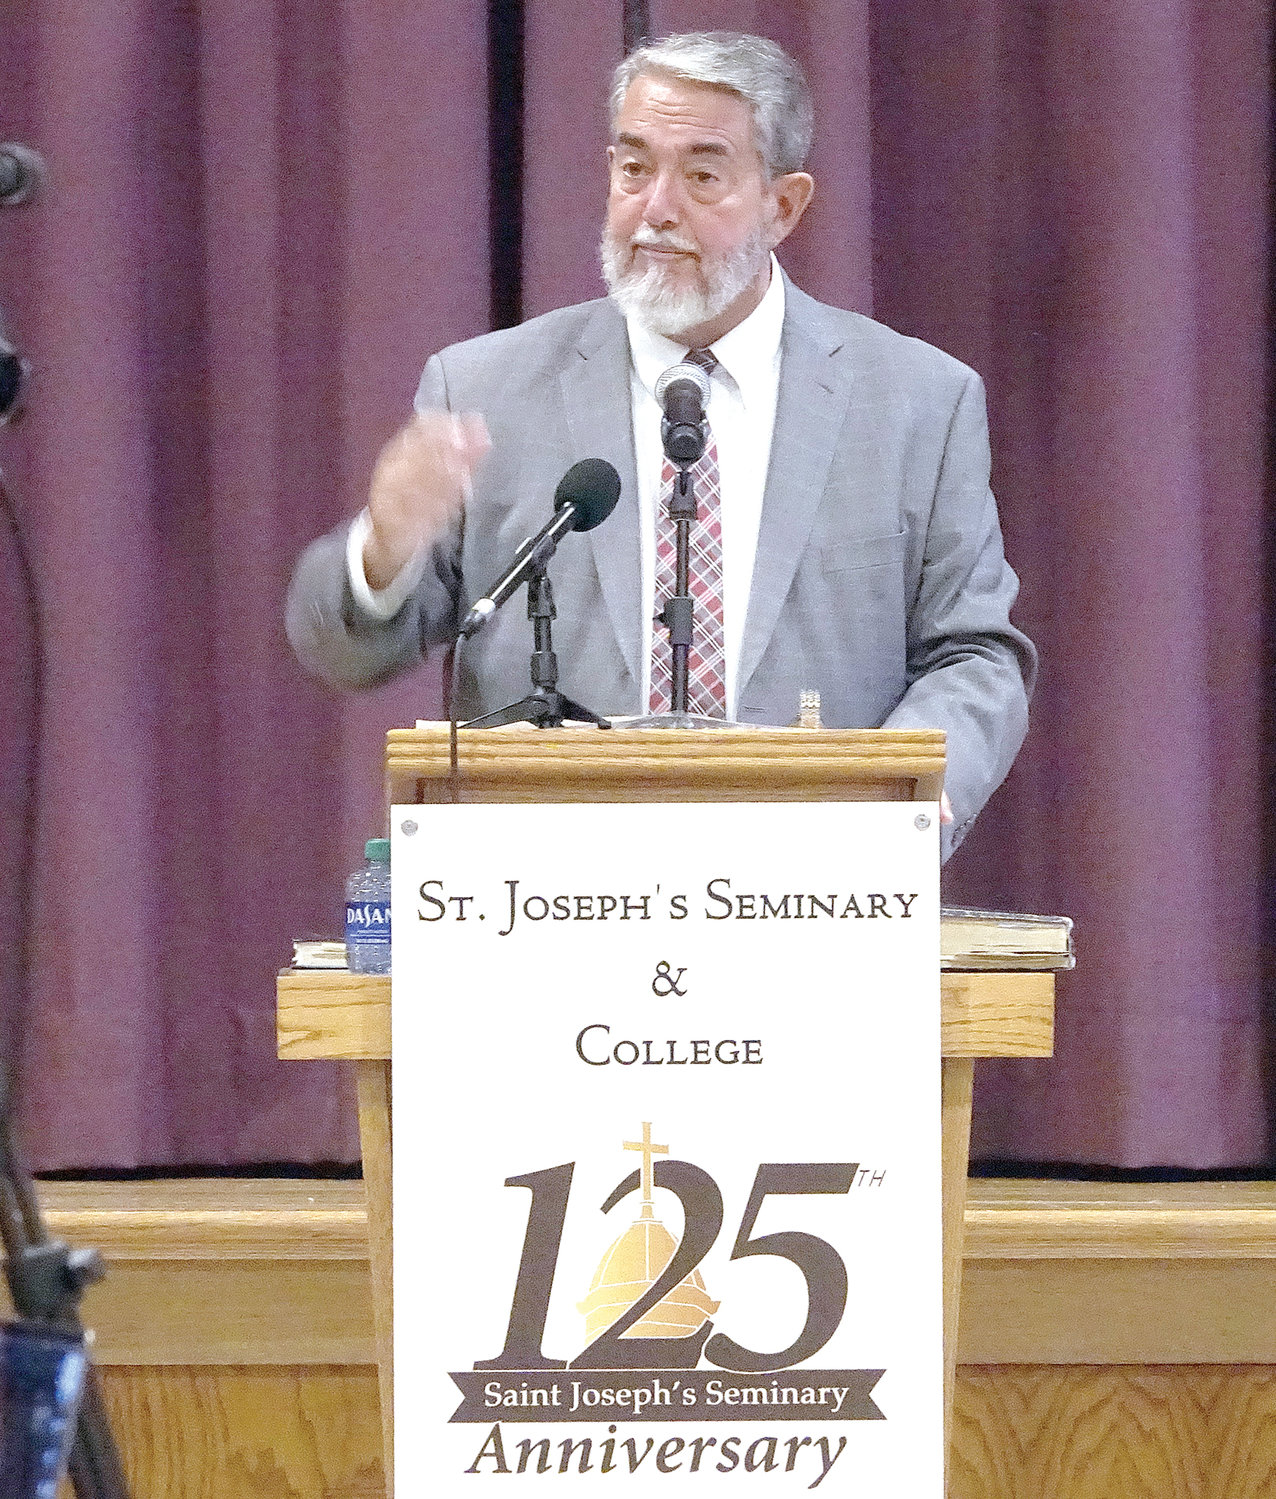 ANNIVERSARY ADDRESS—Dr. Scott Hahn delivers a public lecture on “St. Joseph and the Eucharist” at St. Joseph’s Seminary in Dunwoodie Oct. 1. The well-attended lecture was one of the events scheduled to mark the seminary’s 125th anniversary.